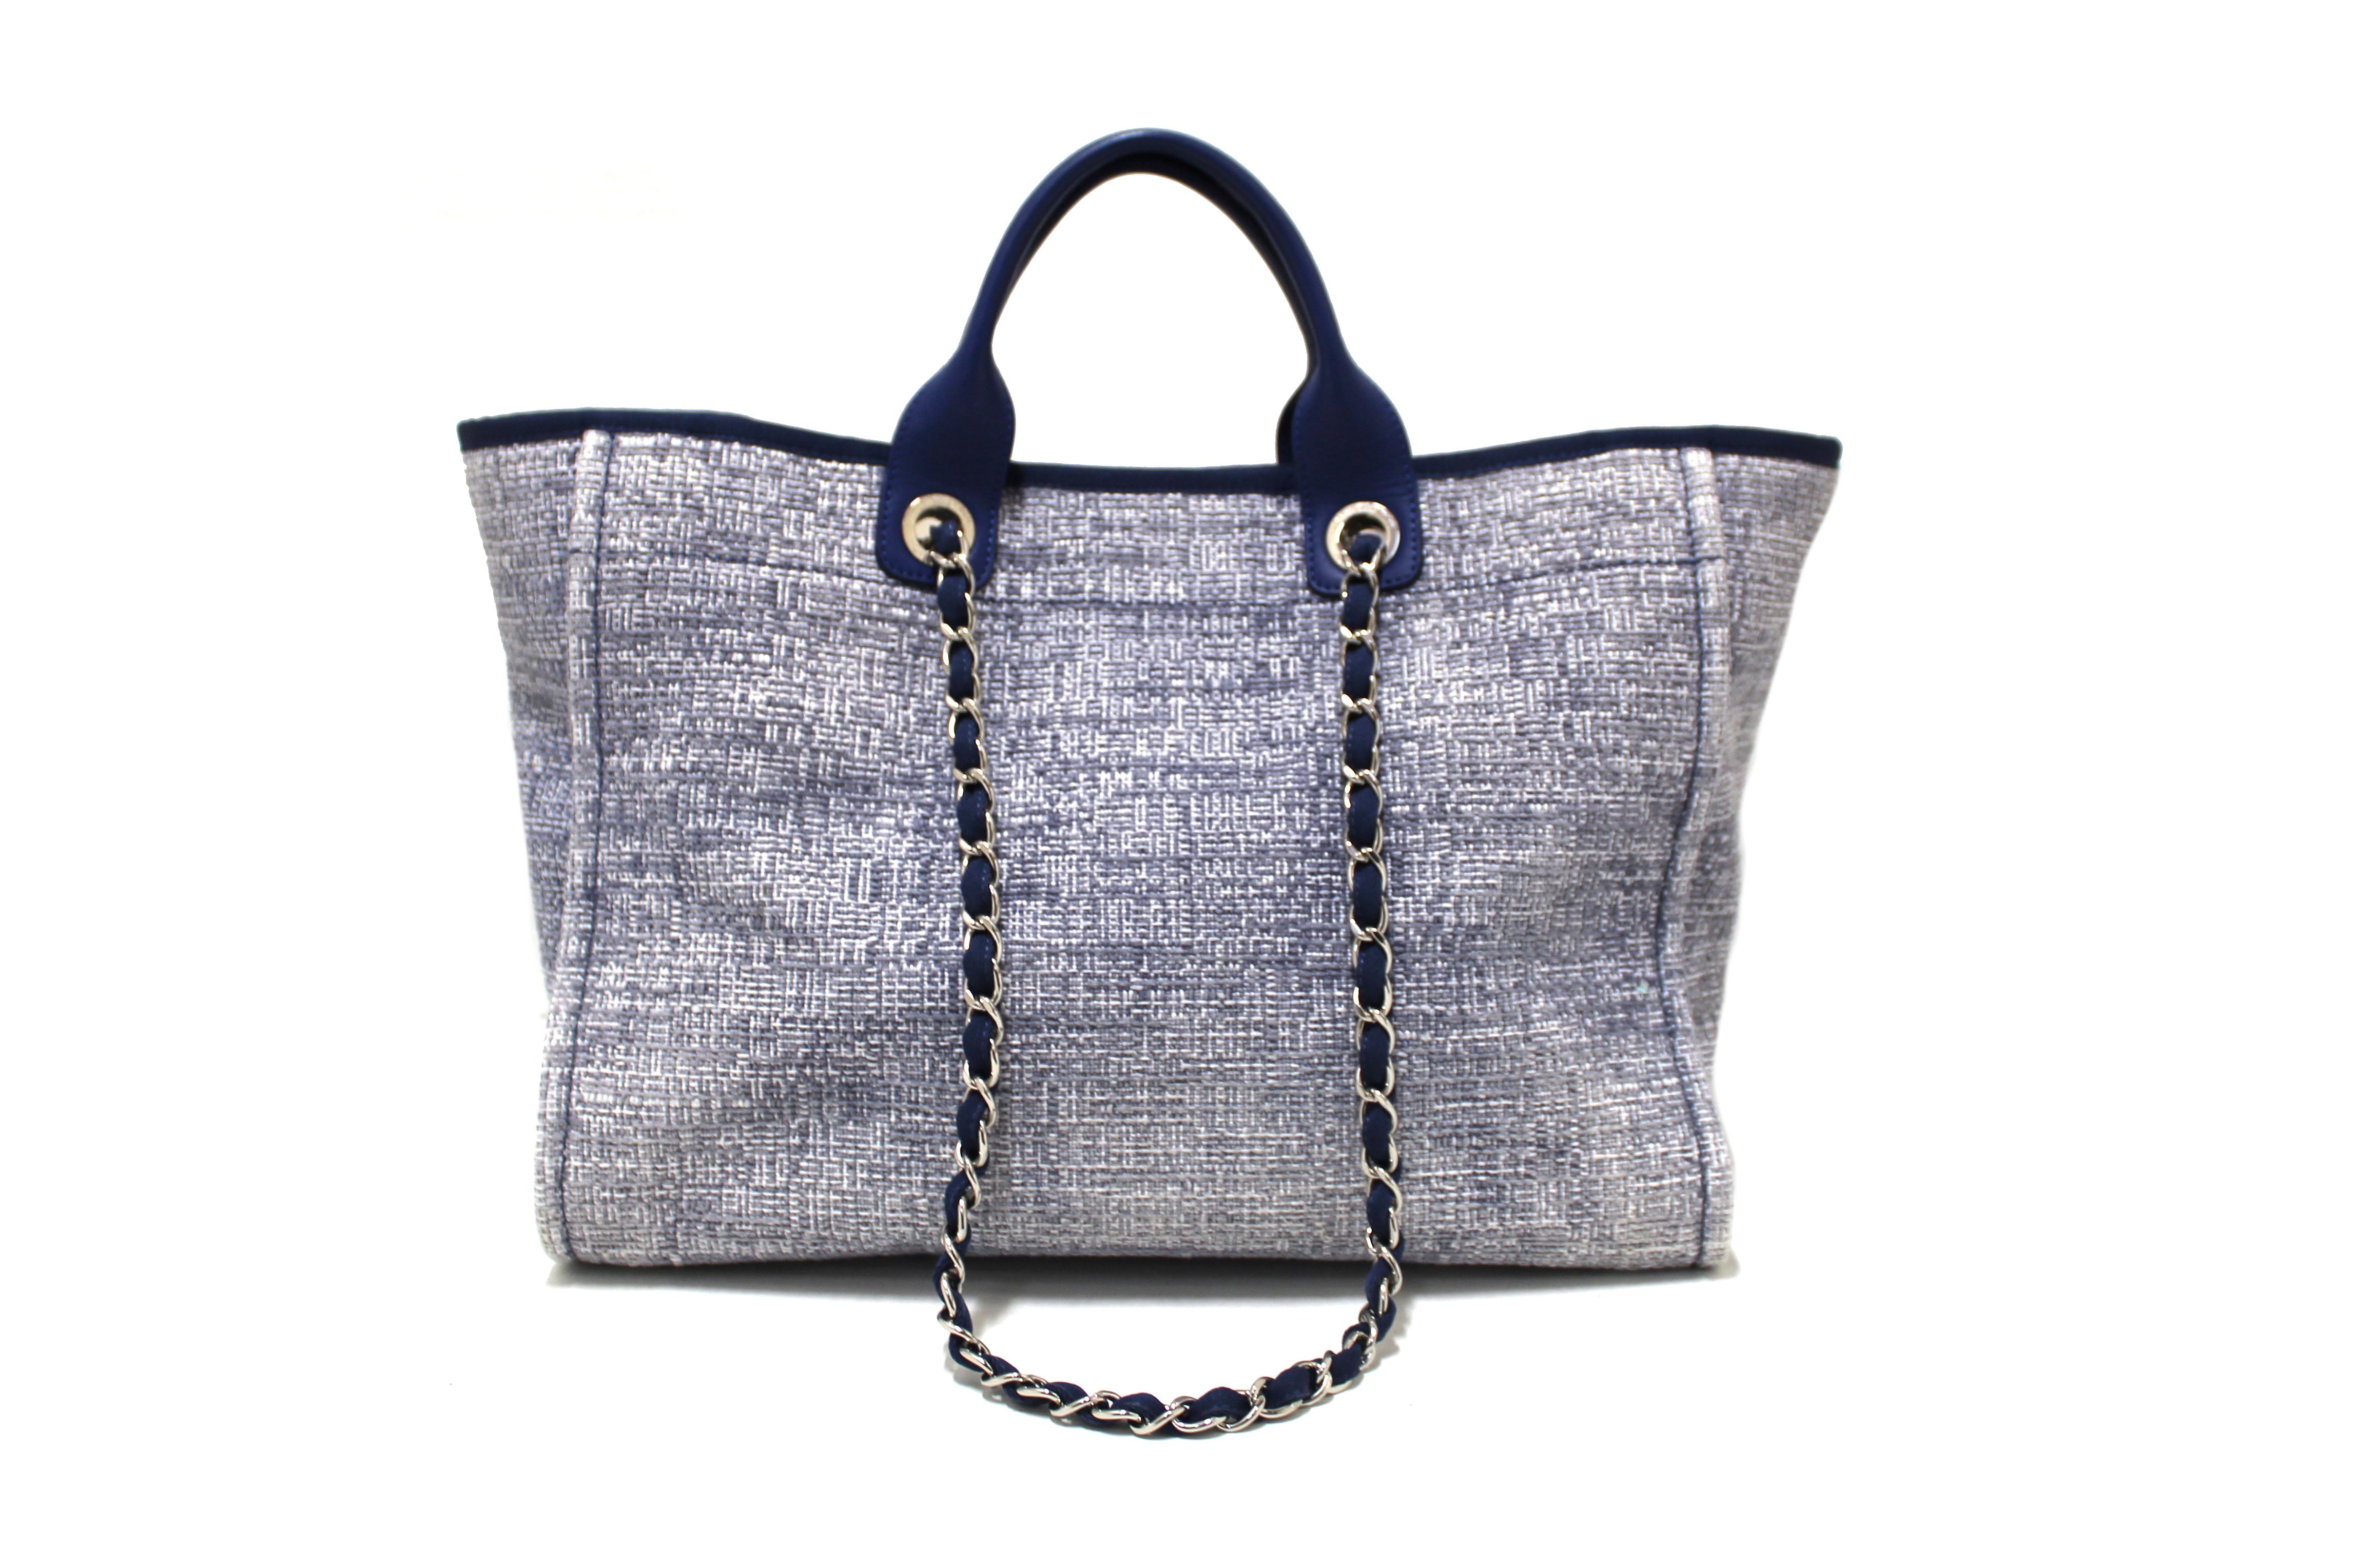 Authentic Chanel Blue Tweed Maxi Deauville Shopping Tote